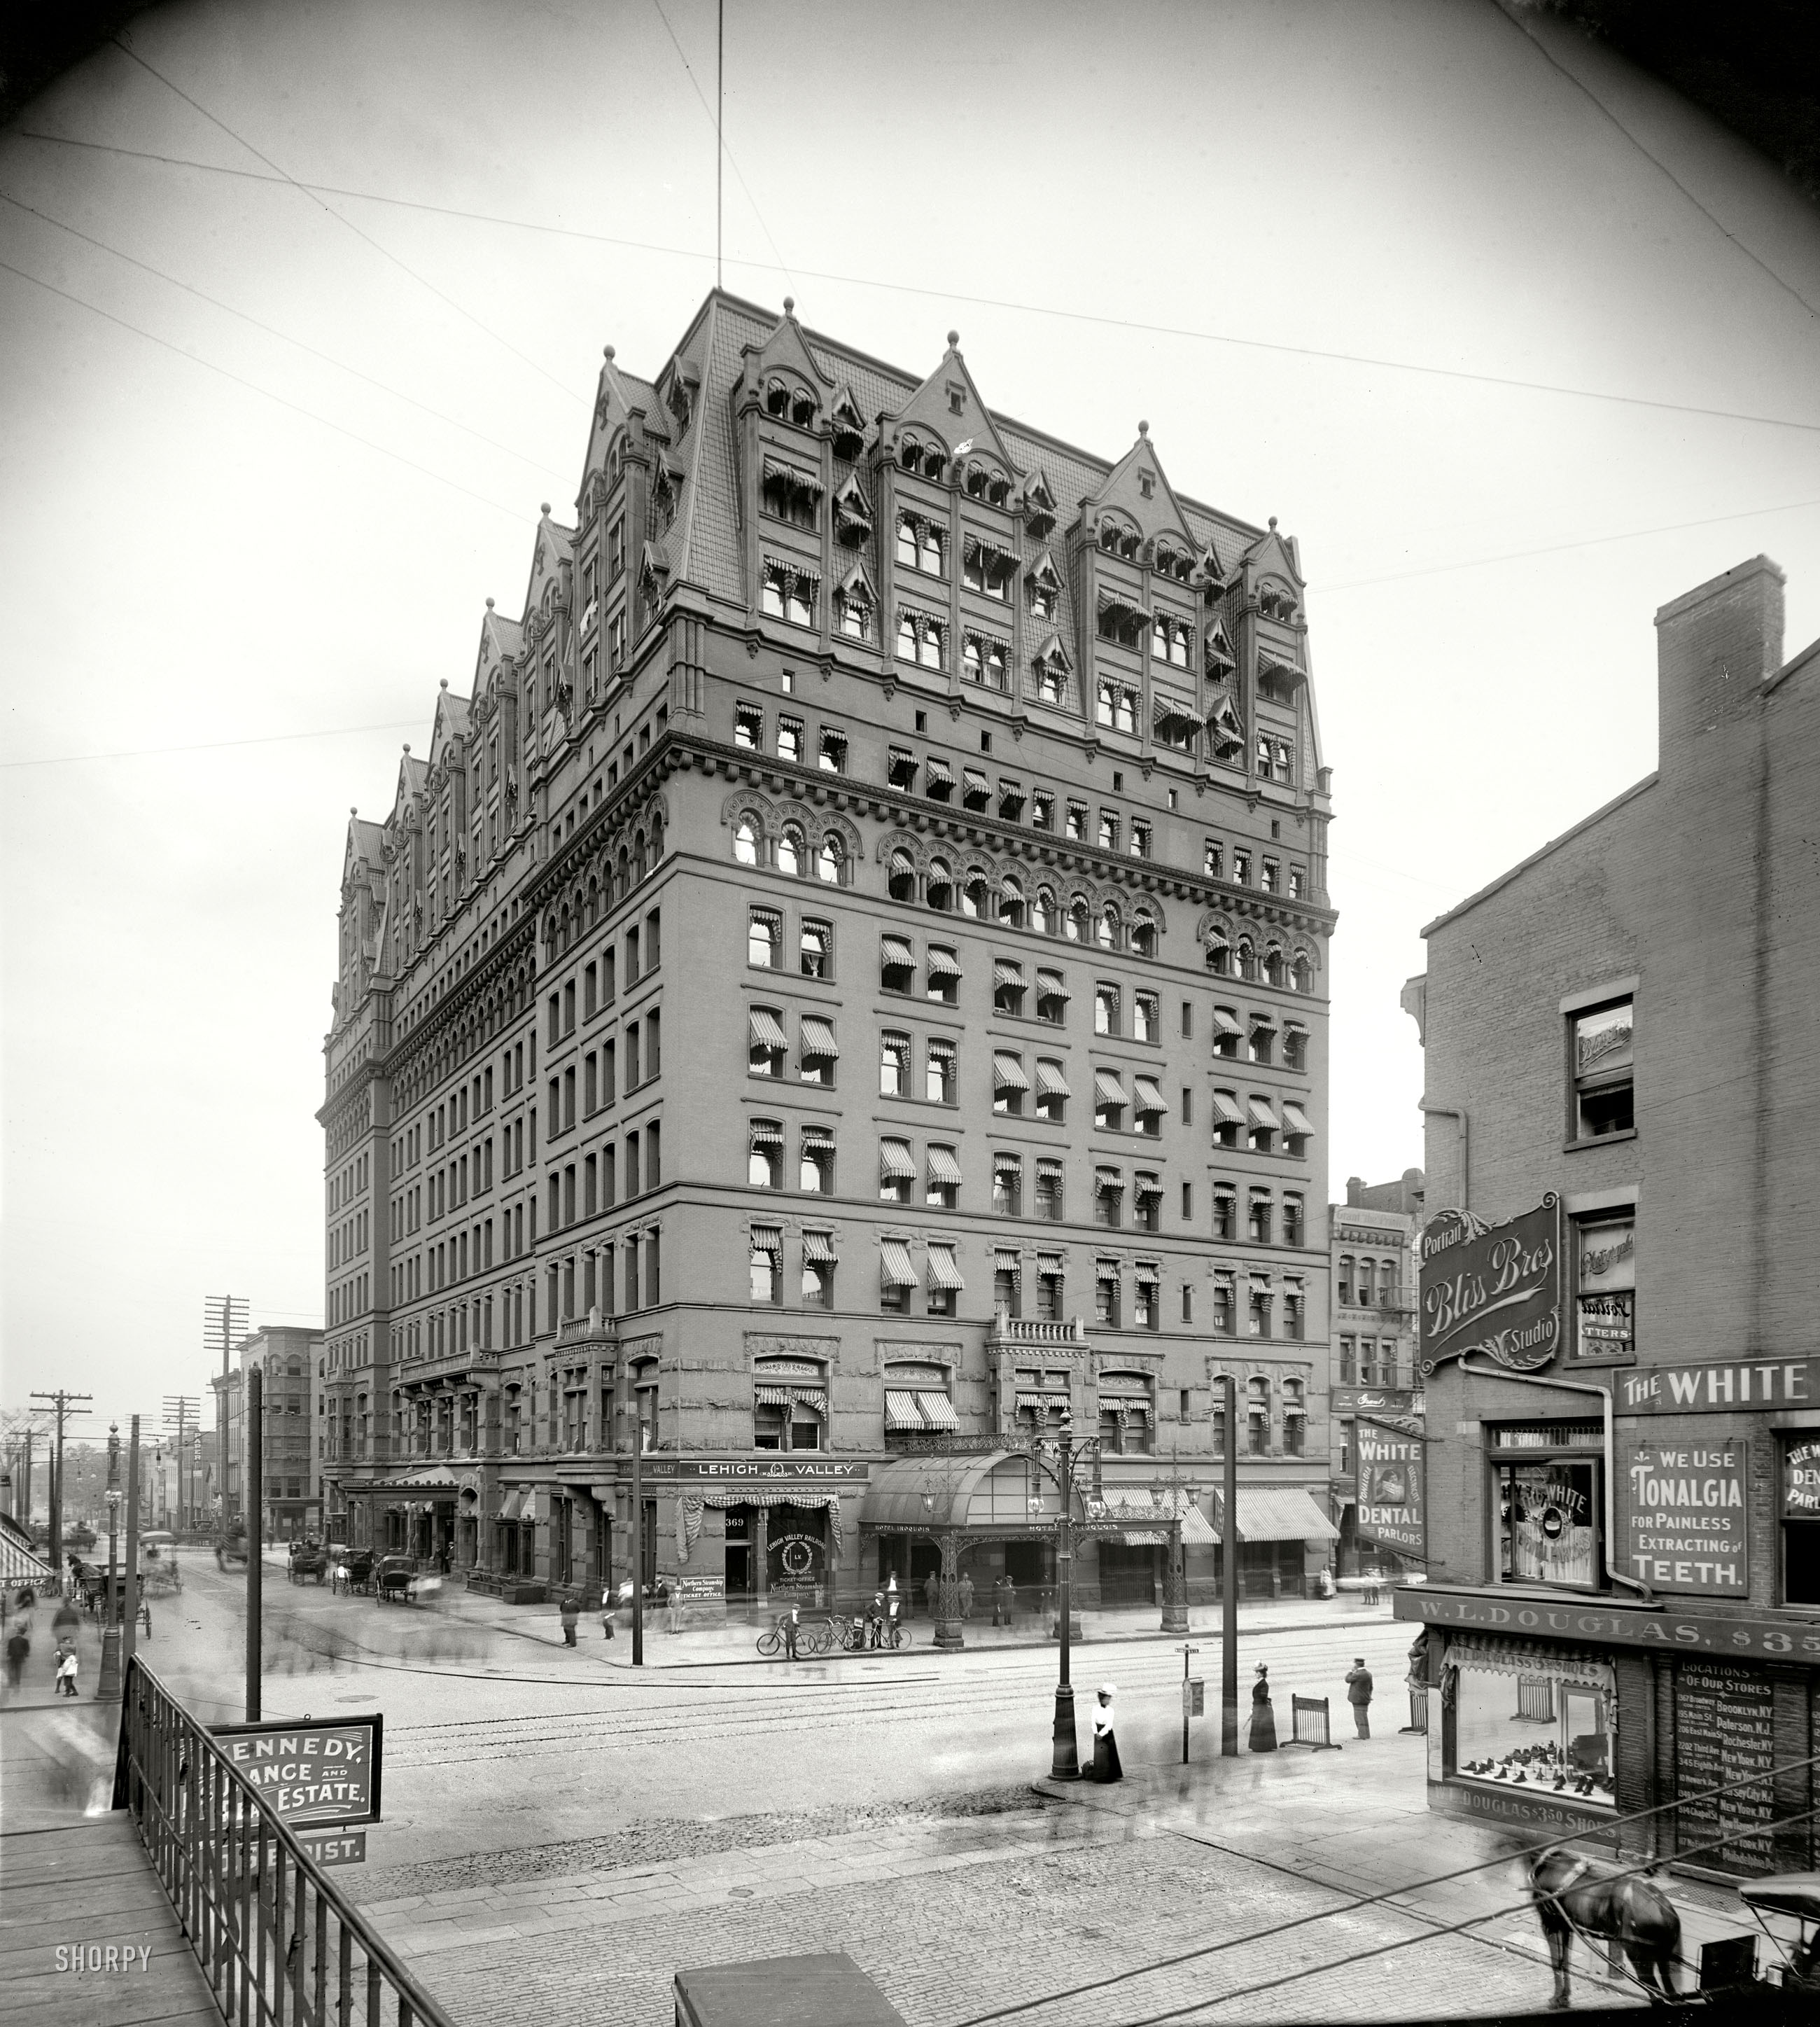 "Hotel Iroquois, Buffalo, 1900." The ectoplasmic pedestrians are out in force. 8x10 inch dry plate glass negative, Detroit Publishing Company. View full size.